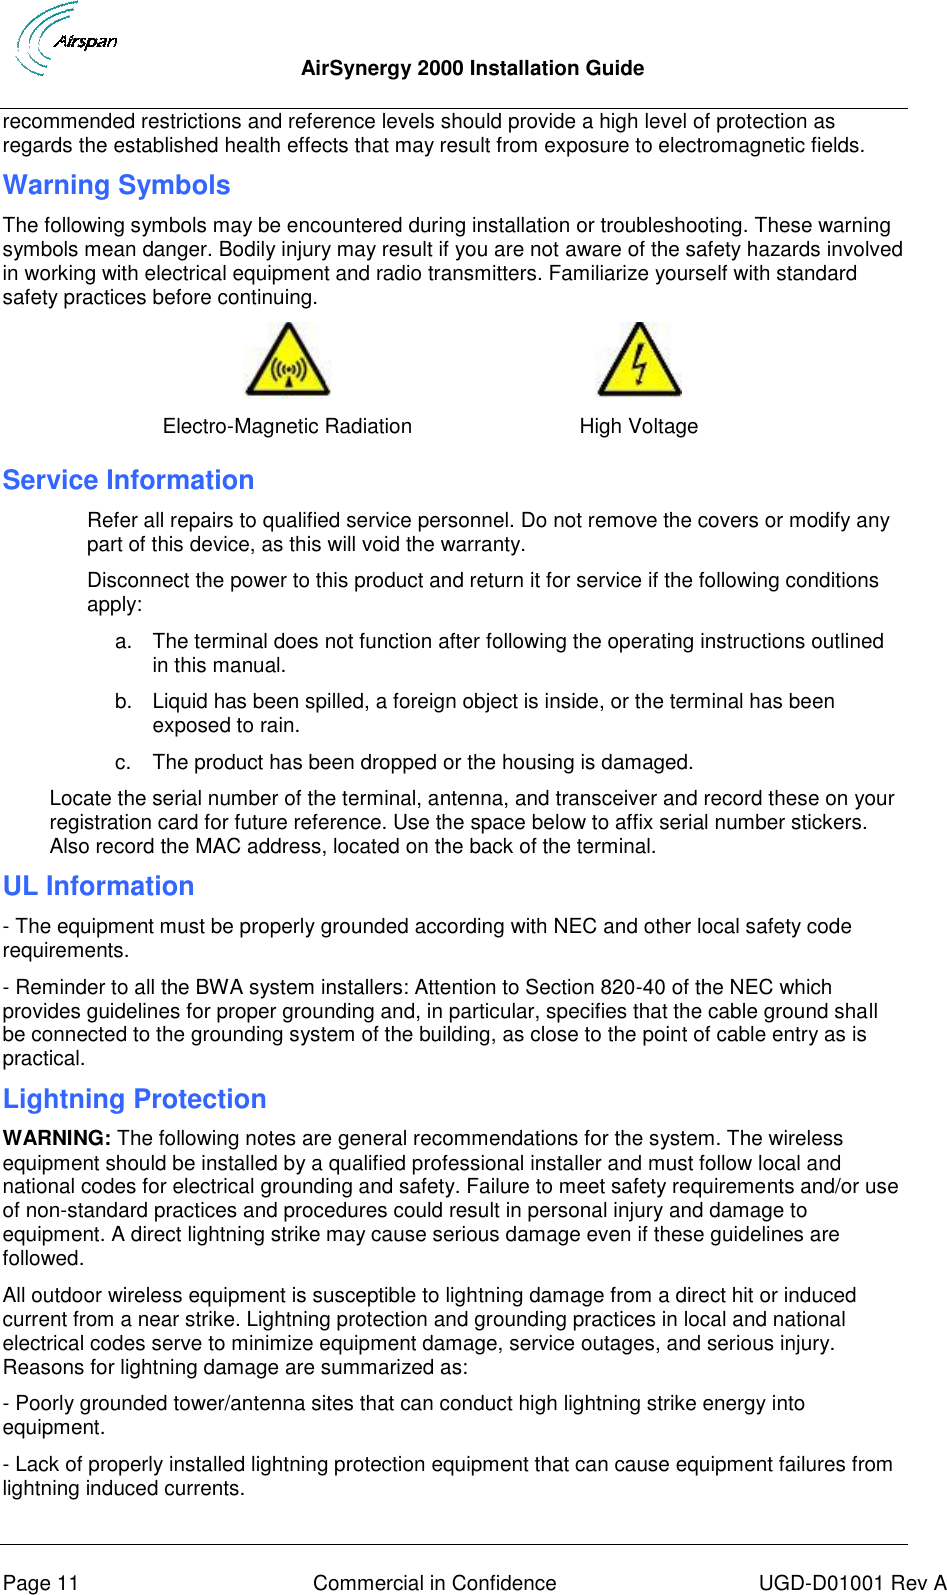  AirSynergy 2000 Installation Guide     Page 11  Commercial in Confidence  UGD-D01001 Rev A recommended restrictions and reference levels should provide a high level of protection as regards the established health effects that may result from exposure to electromagnetic fields. Warning Symbols The following symbols may be encountered during installation or troubleshooting. These warning symbols mean danger. Bodily injury may result if you are not aware of the safety hazards involved in working with electrical equipment and radio transmitters. Familiarize yourself with standard safety practices before continuing.   Electro-Magnetic Radiation High Voltage Service Information Refer all repairs to qualified service personnel. Do not remove the covers or modify any part of this device, as this will void the warranty. Disconnect the power to this product and return it for service if the following conditions apply: a.  The terminal does not function after following the operating instructions outlined in this manual. b.  Liquid has been spilled, a foreign object is inside, or the terminal has been exposed to rain. c.  The product has been dropped or the housing is damaged. Locate the serial number of the terminal, antenna, and transceiver and record these on your registration card for future reference. Use the space below to affix serial number stickers. Also record the MAC address, located on the back of the terminal. UL Information - The equipment must be properly grounded according with NEC and other local safety code requirements. - Reminder to all the BWA system installers: Attention to Section 820-40 of the NEC which provides guidelines for proper grounding and, in particular, specifies that the cable ground shall be connected to the grounding system of the building, as close to the point of cable entry as is practical. Lightning Protection WARNING: The following notes are general recommendations for the system. The wireless equipment should be installed by a qualified professional installer and must follow local and national codes for electrical grounding and safety. Failure to meet safety requirements and/or use of non-standard practices and procedures could result in personal injury and damage to equipment. A direct lightning strike may cause serious damage even if these guidelines are followed. All outdoor wireless equipment is susceptible to lightning damage from a direct hit or induced current from a near strike. Lightning protection and grounding practices in local and national electrical codes serve to minimize equipment damage, service outages, and serious injury. Reasons for lightning damage are summarized as: - Poorly grounded tower/antenna sites that can conduct high lightning strike energy into equipment. - Lack of properly installed lightning protection equipment that can cause equipment failures from lightning induced currents. 